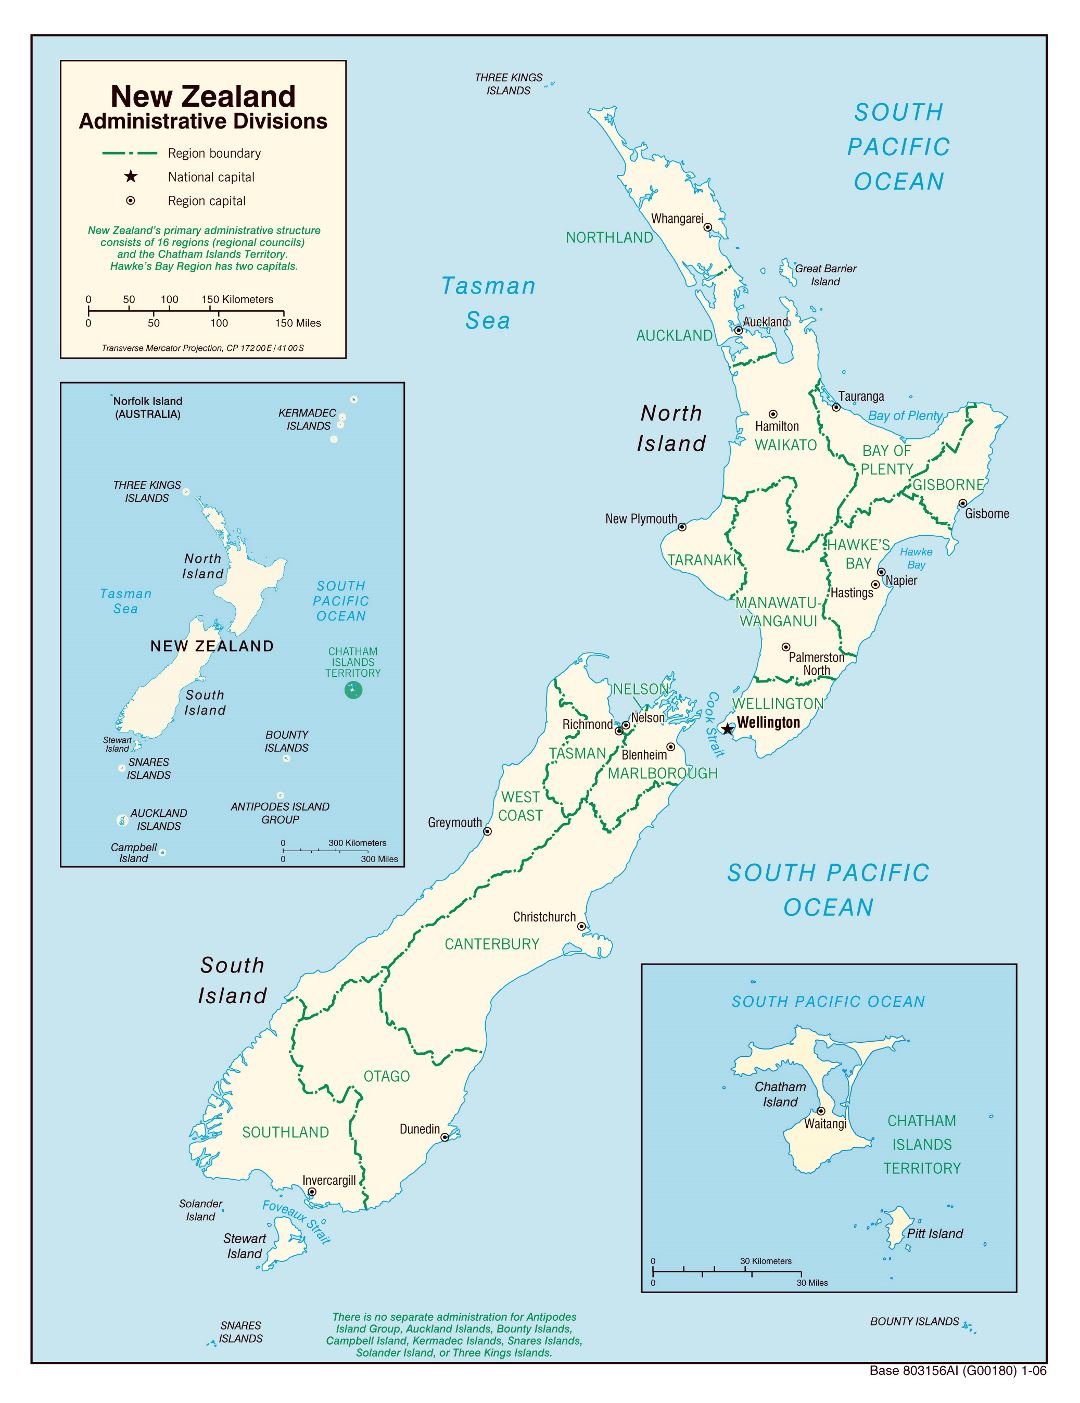 Large administrative divisions map of New Zealand - 2006